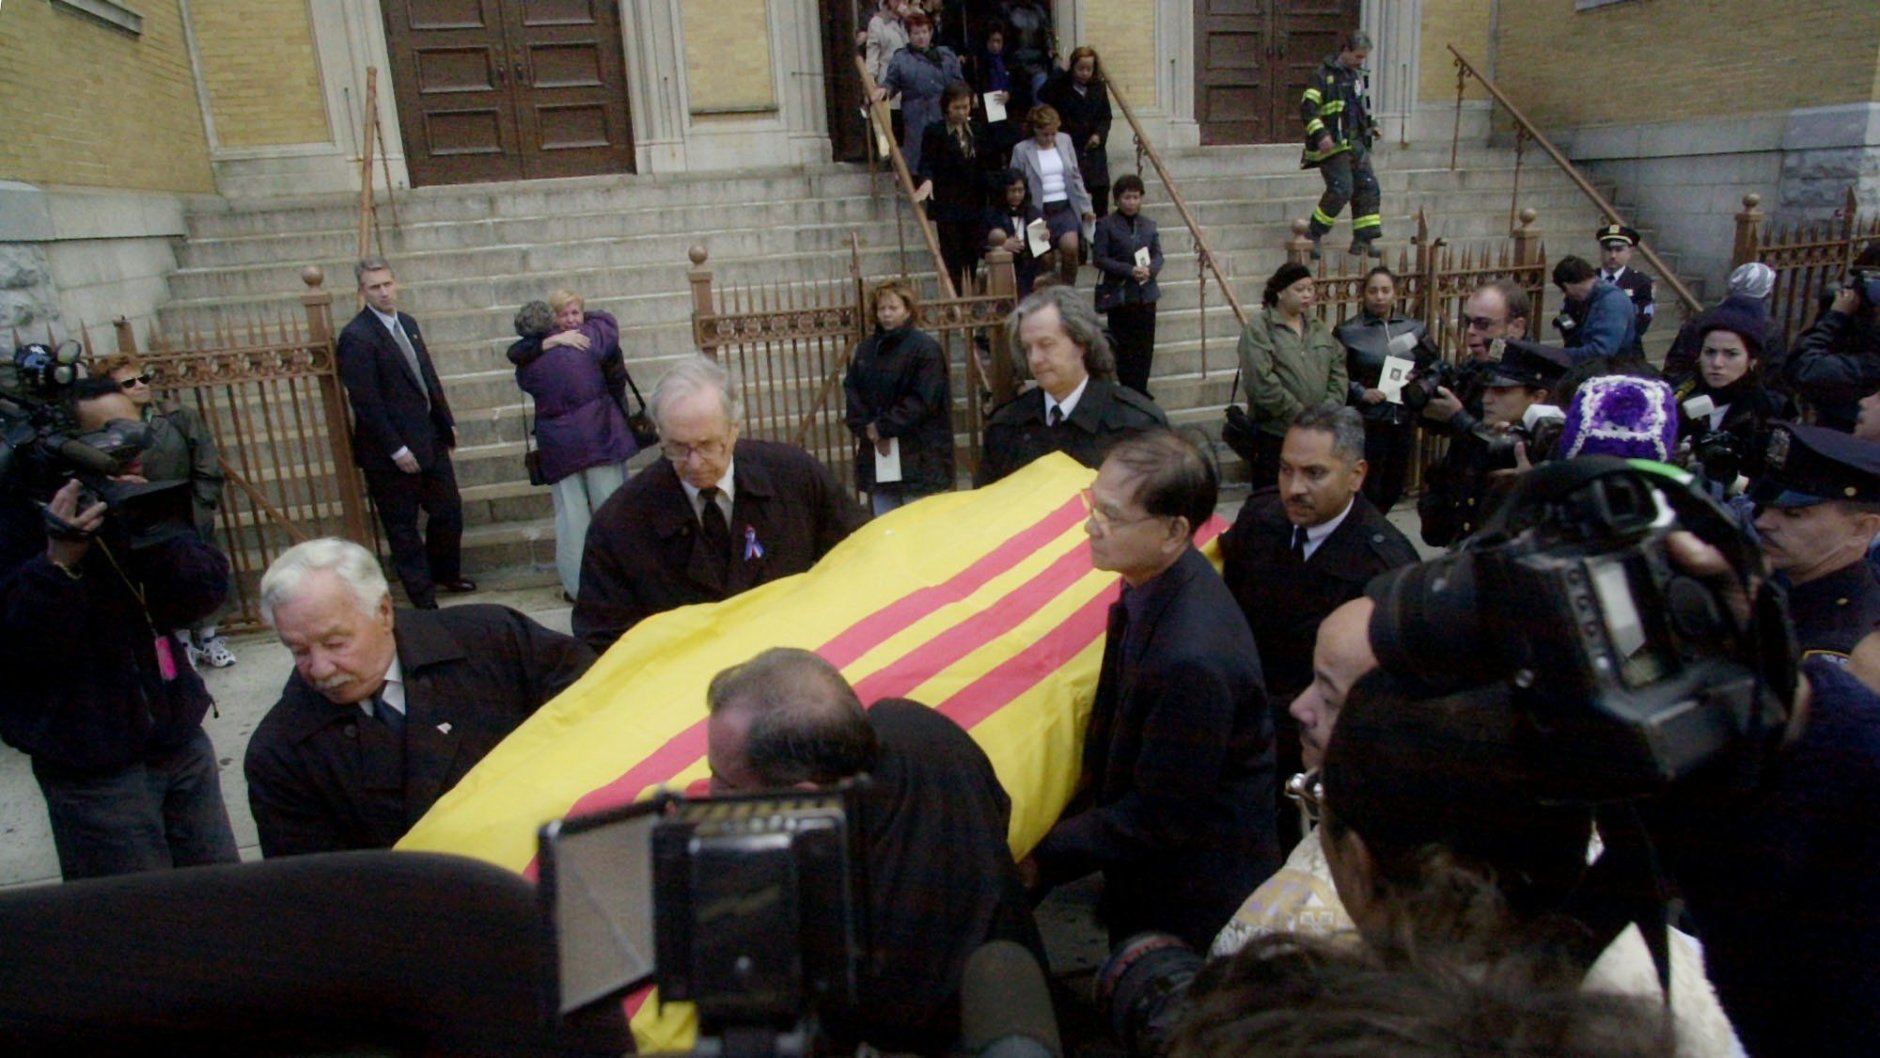 The casket containing the remains of Kathy T. Nguyen is taken from St. John Chrysostom Roman Catholic Church in the Bronx borough of New York, Monday, Nov. 5, 2001, after her funeral mass. Nguyen, an employee of the Manhattan Eye, Ear and Throat Hospital, died Wednesday of the inhaled form of anthrax. (AP Photo/Ed Betz)